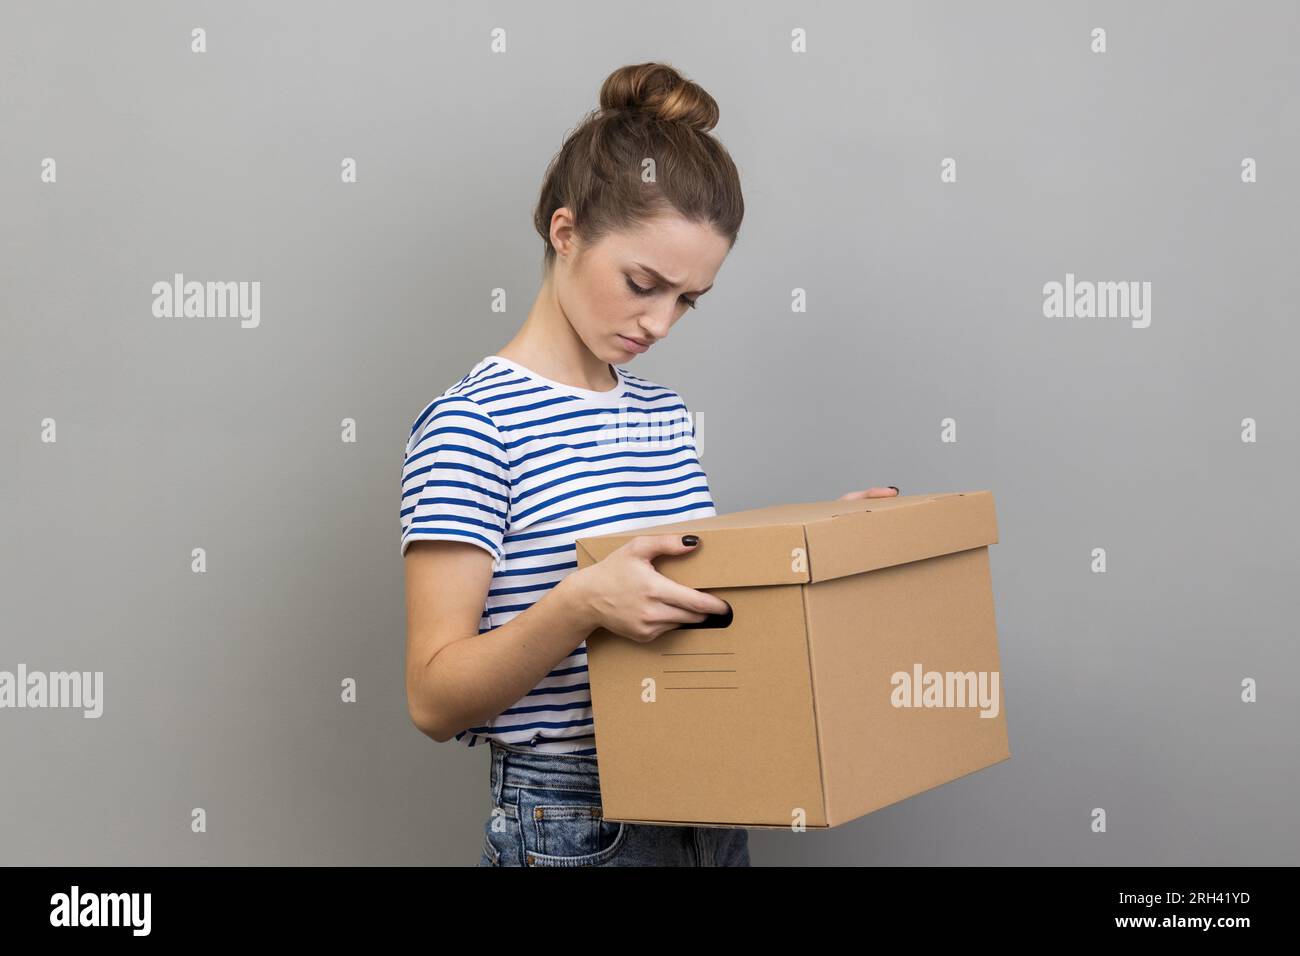 Portrait of sad upset attractive woman wearing striped T-shirt holding carton box with stuff, looking down with sorrow and sadness, lost her job. Indoor studio shot isolated on gray background Stock Photo